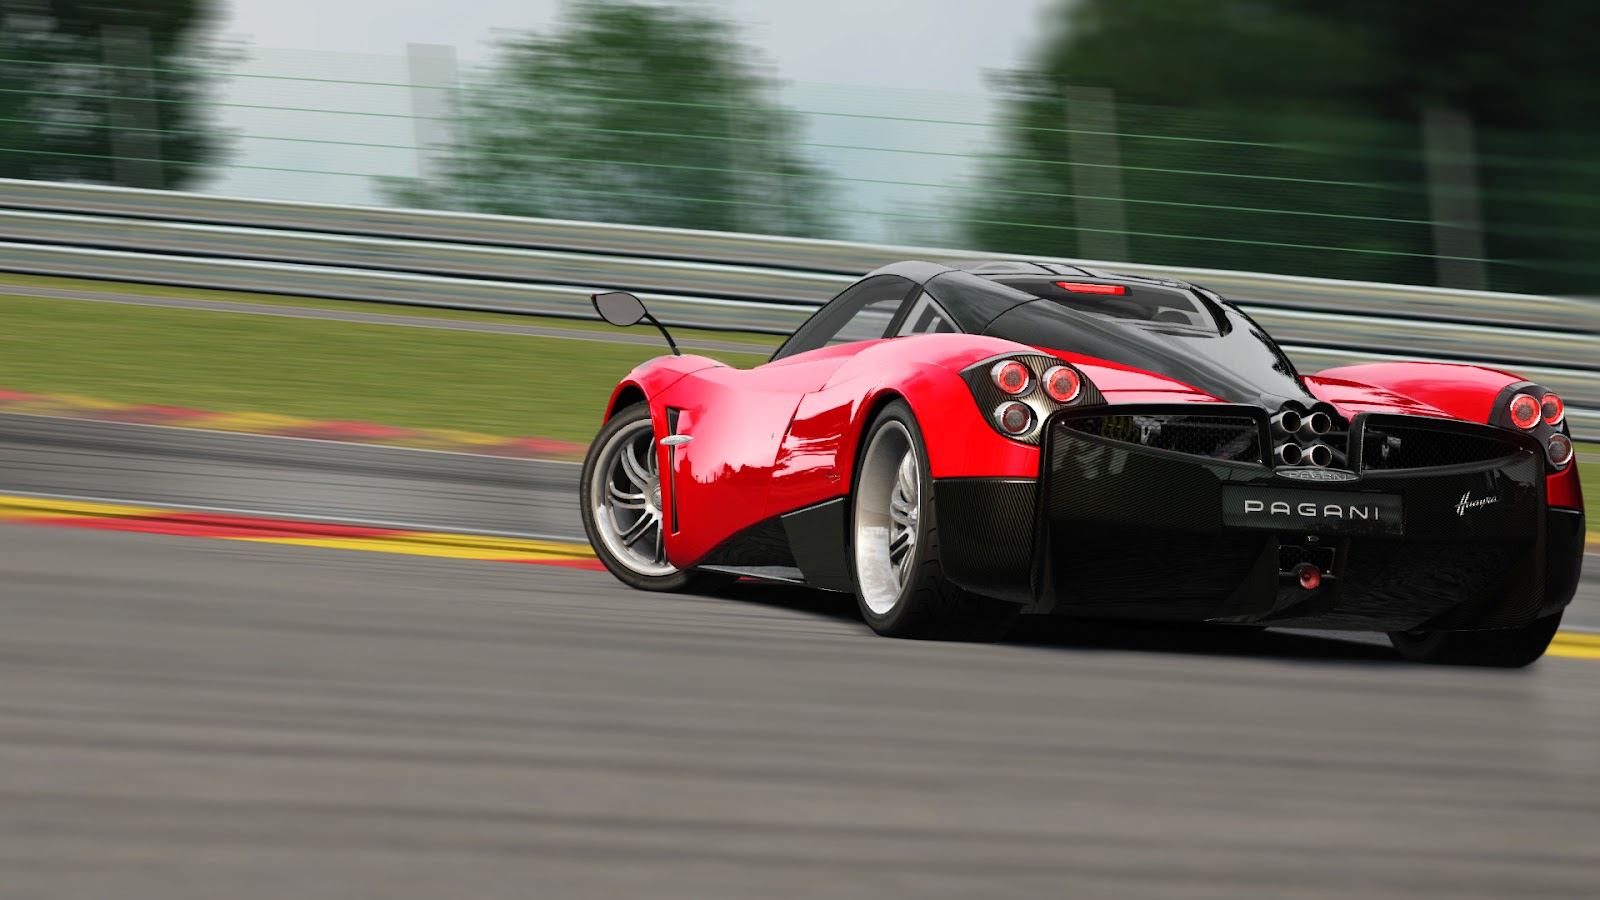 Picture of a Pagani Huayra on Assetto Corsa